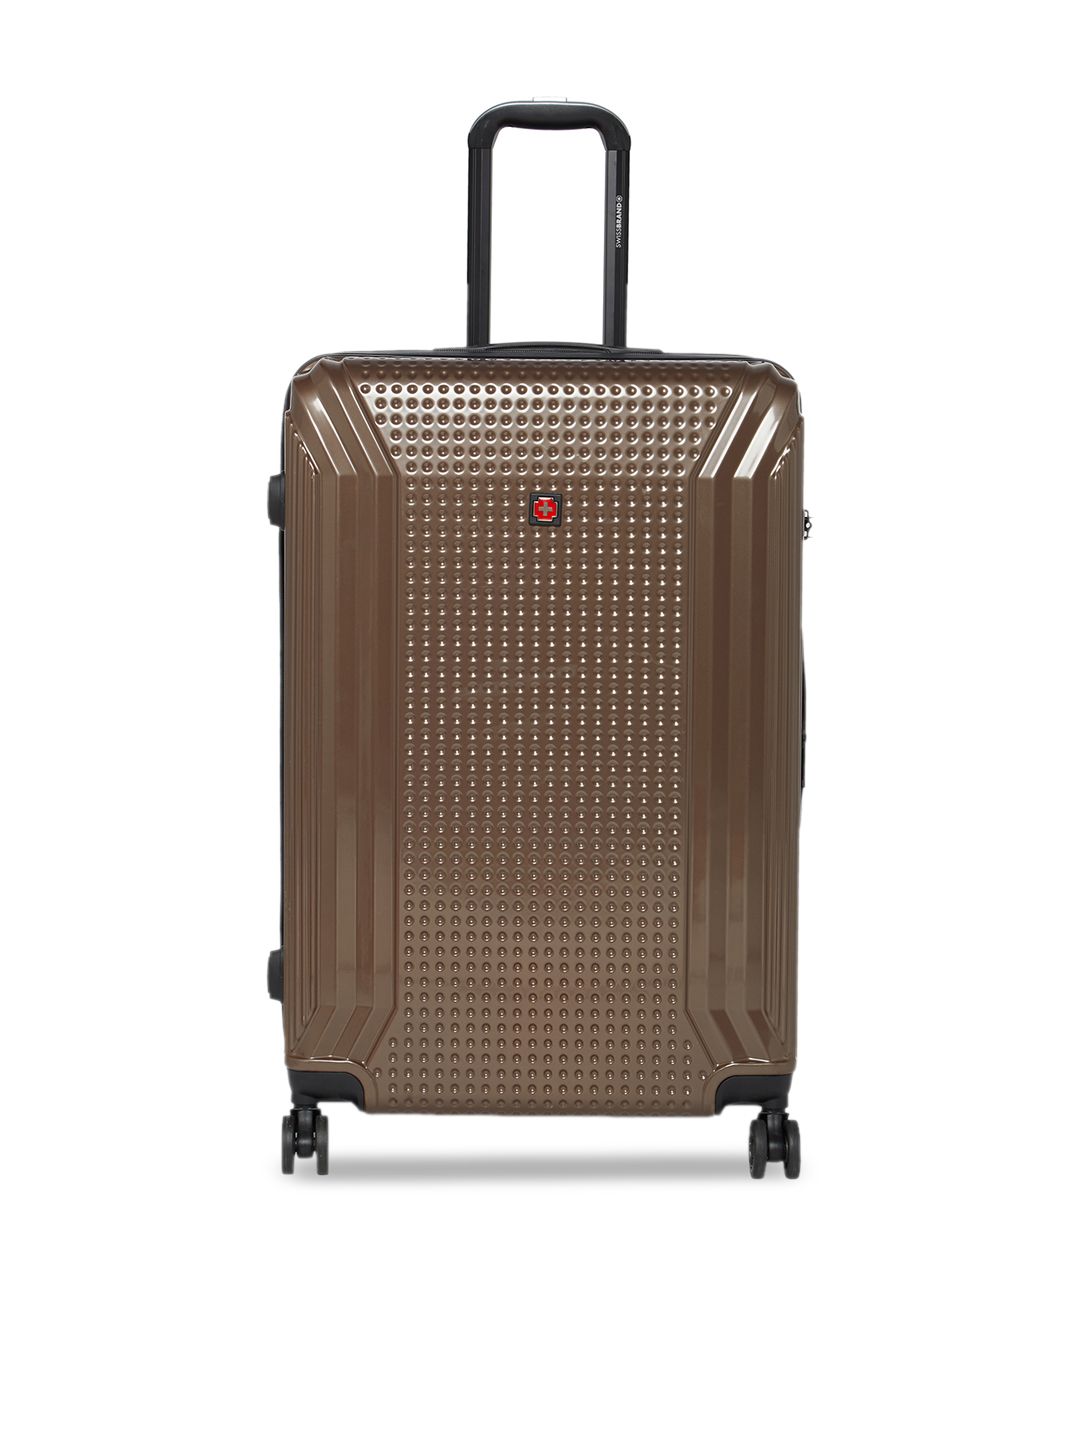 SWISS BRAND Coffee Brown Textured VERNIER 360-Degree Rotation Hard-Sided Large Trolley Suitcase Price in India